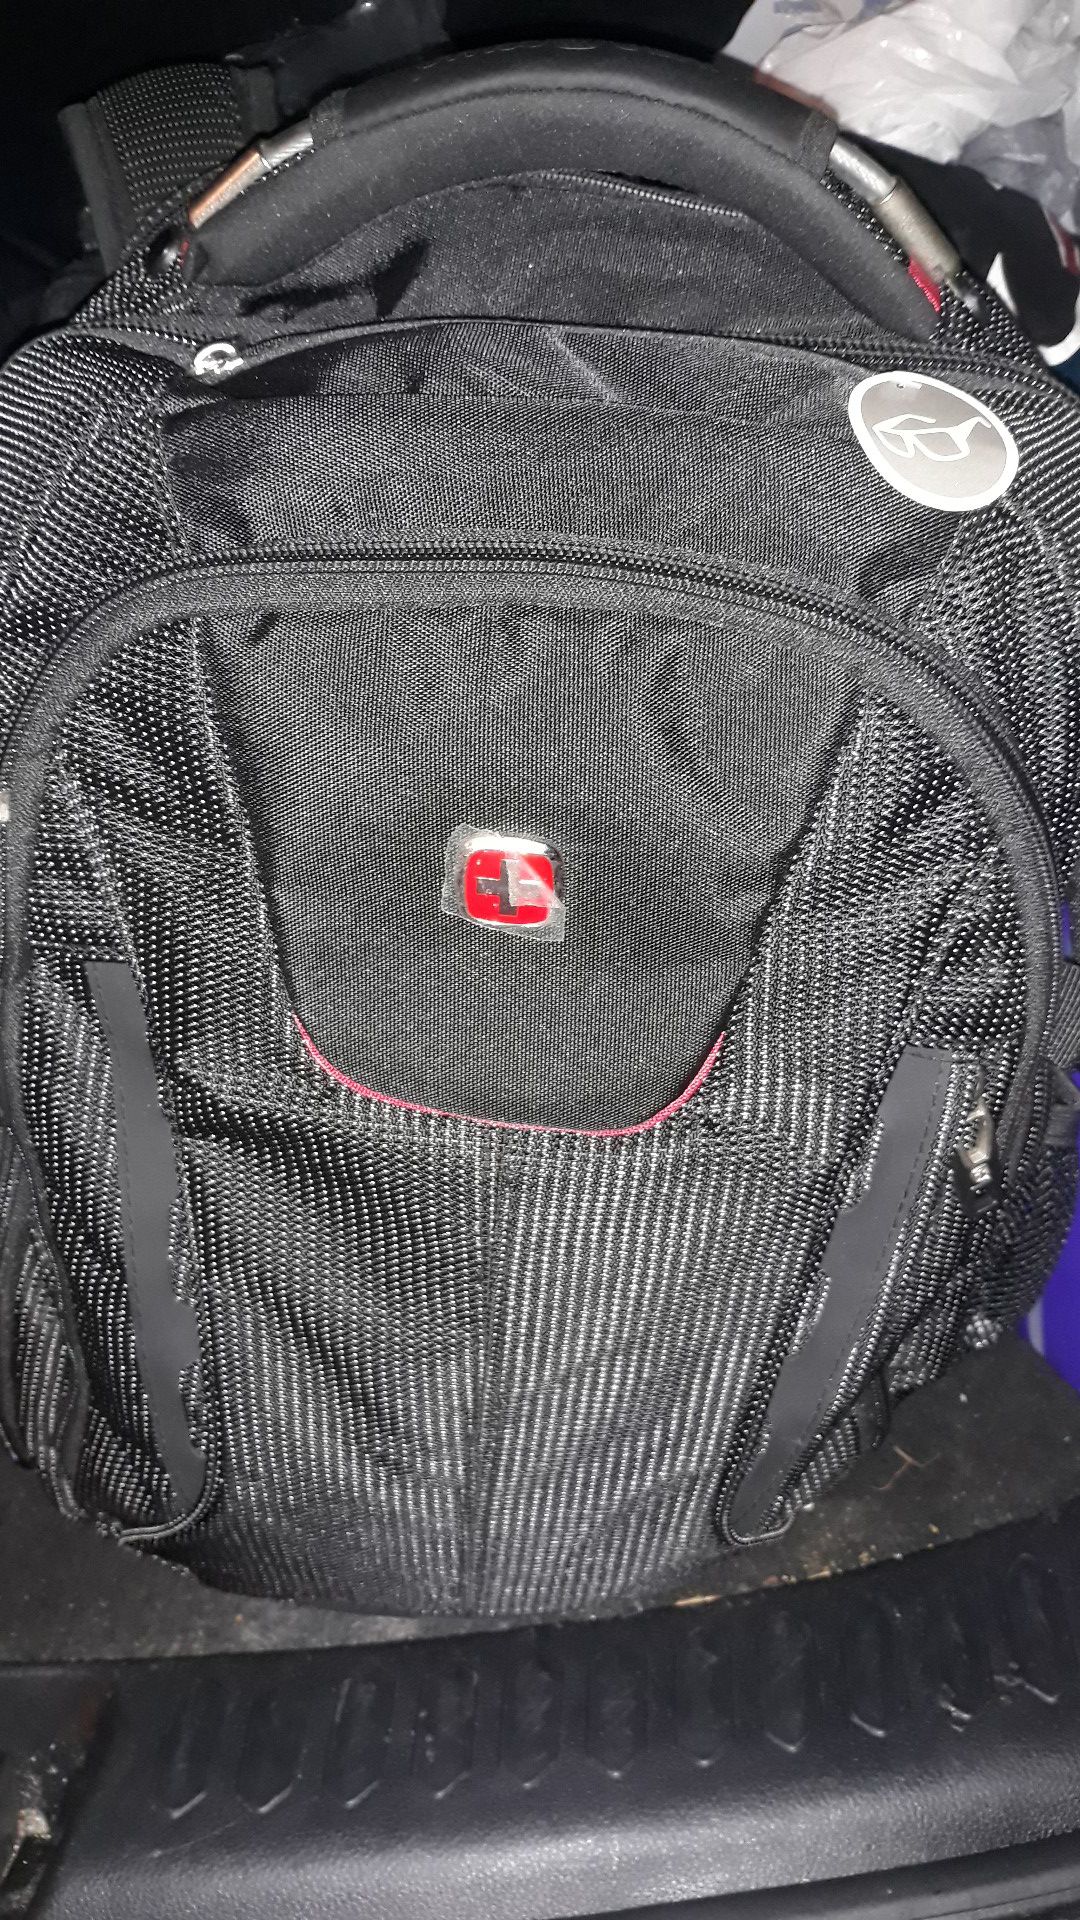 Brand new swiss army backpack